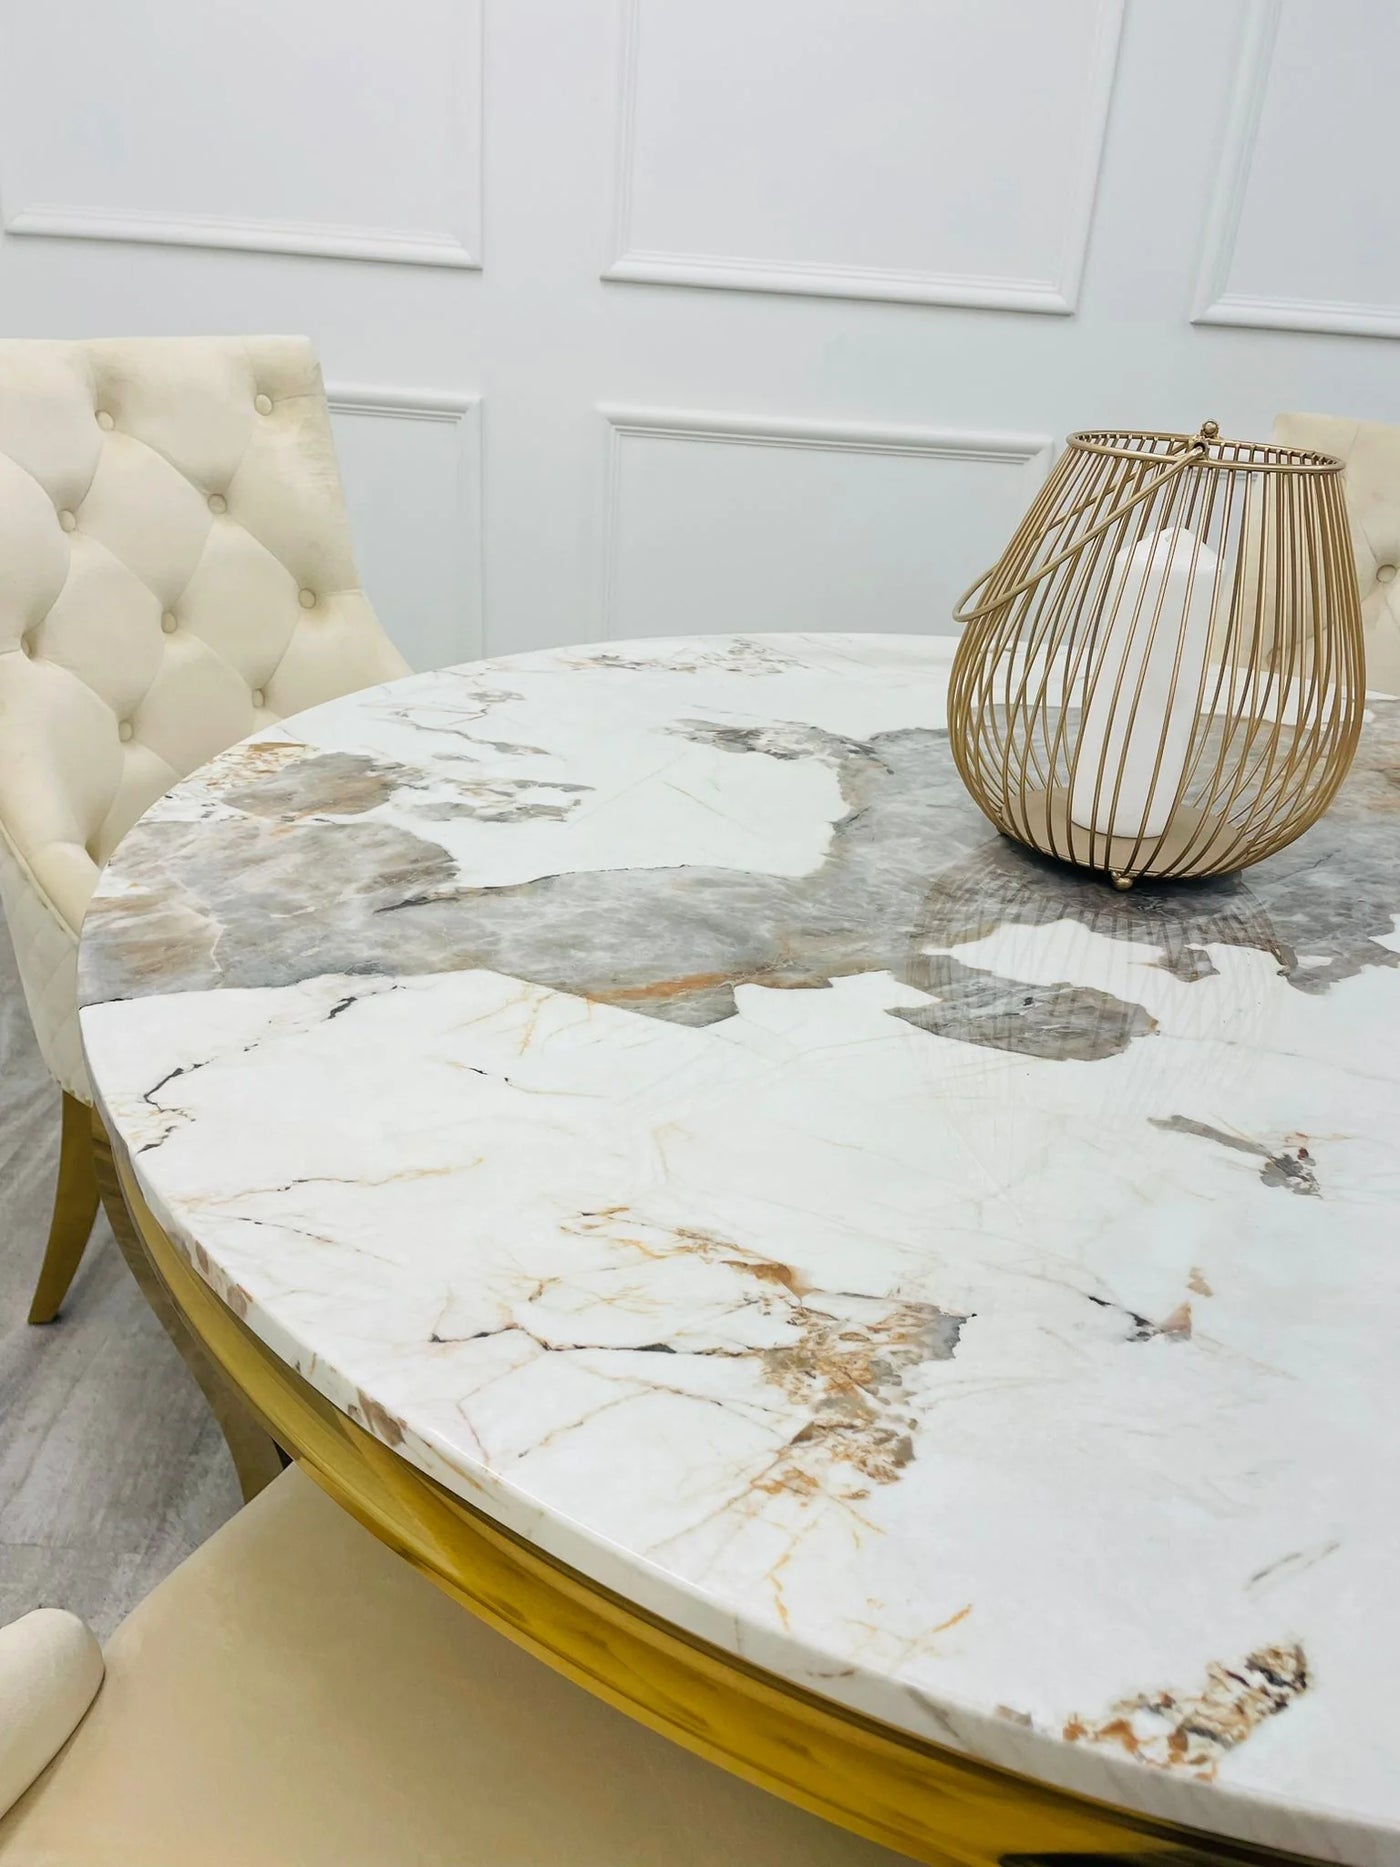 Louis 130cm Round Pandora Bronze Marble Gold Dining Table + Majestic Gold Lion Dining Chairs